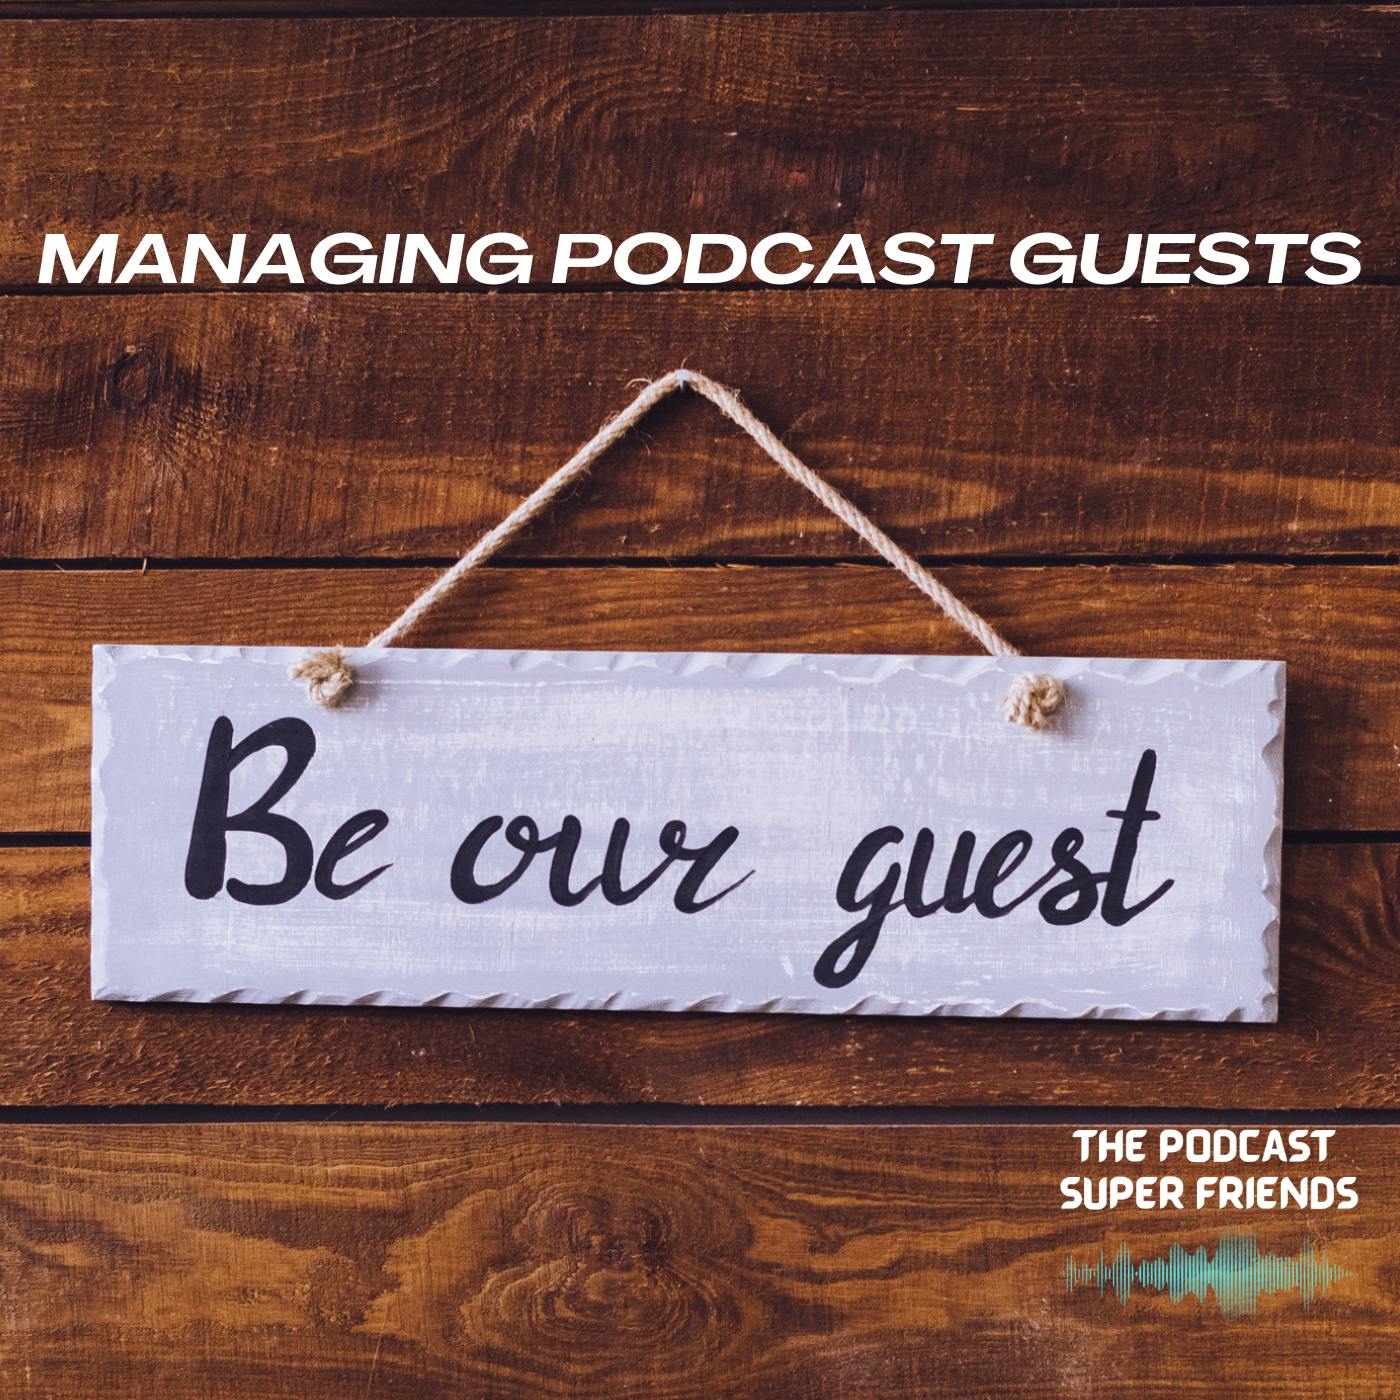 Be Our Guest: Managing Podcast Guests